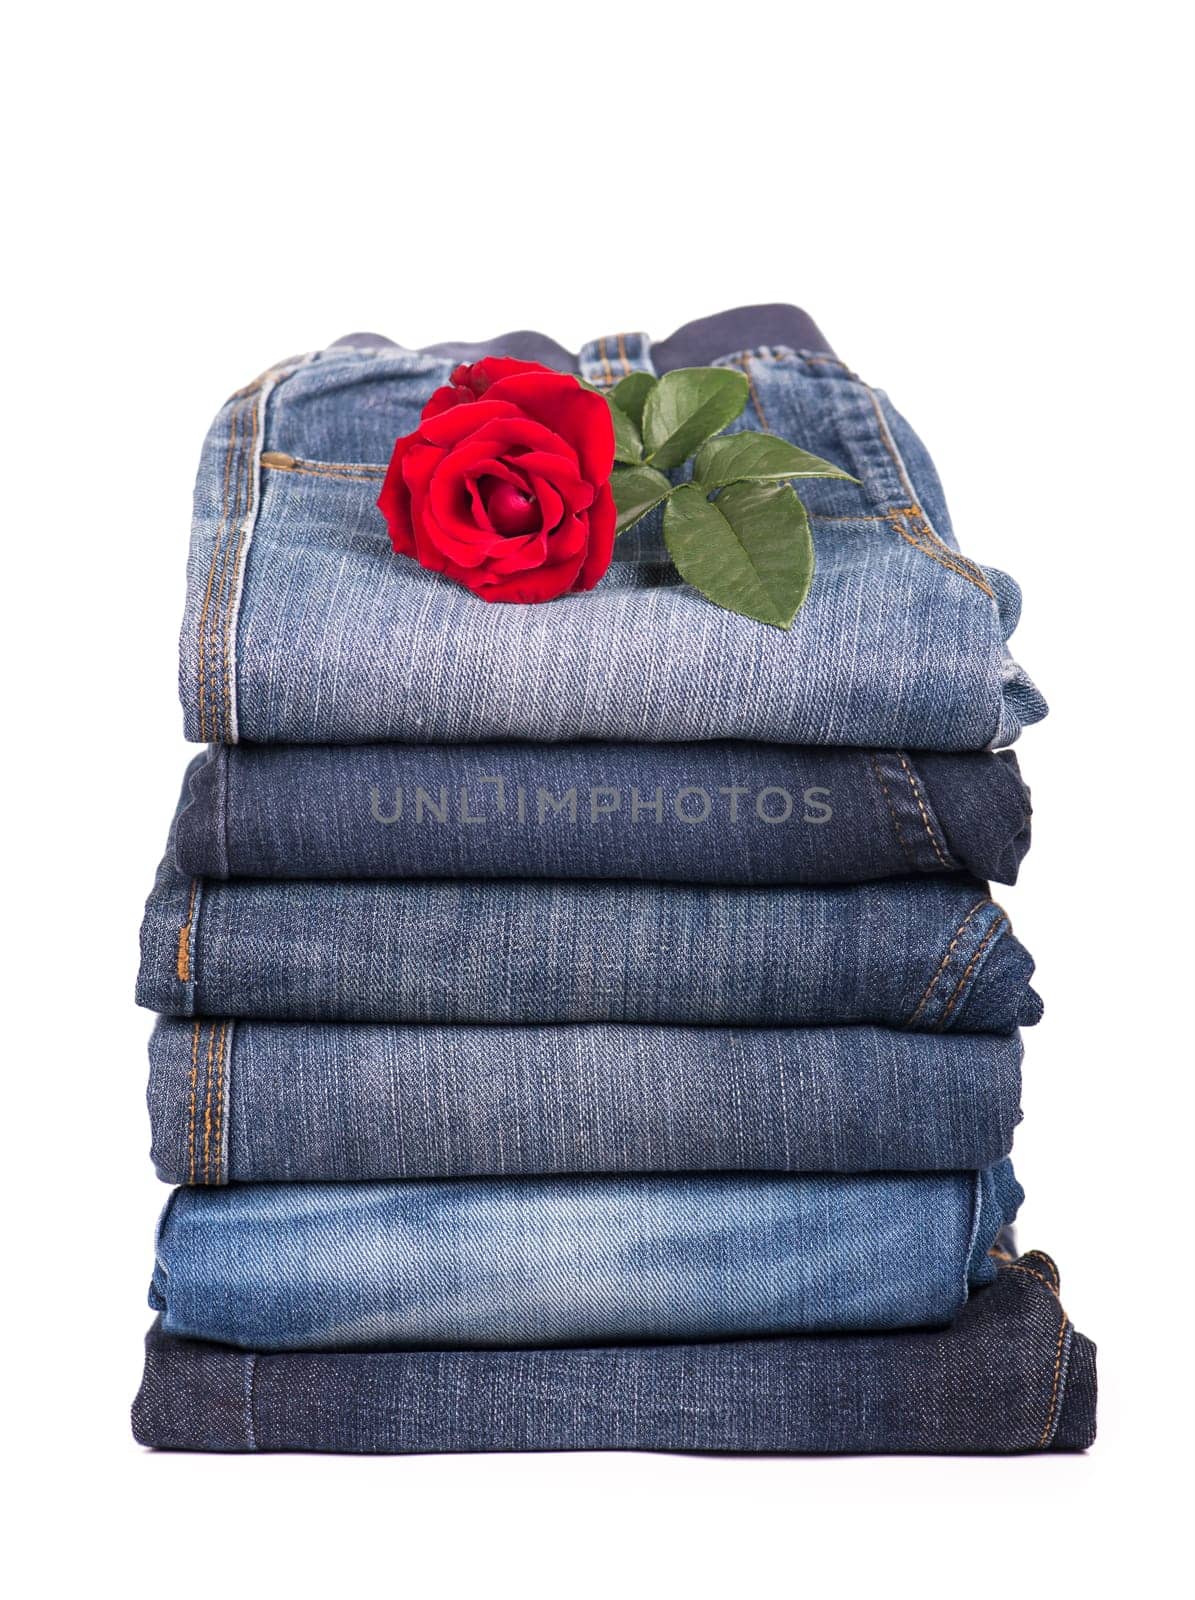 jeans clothes are put by a pile and a red rose by aprilphoto